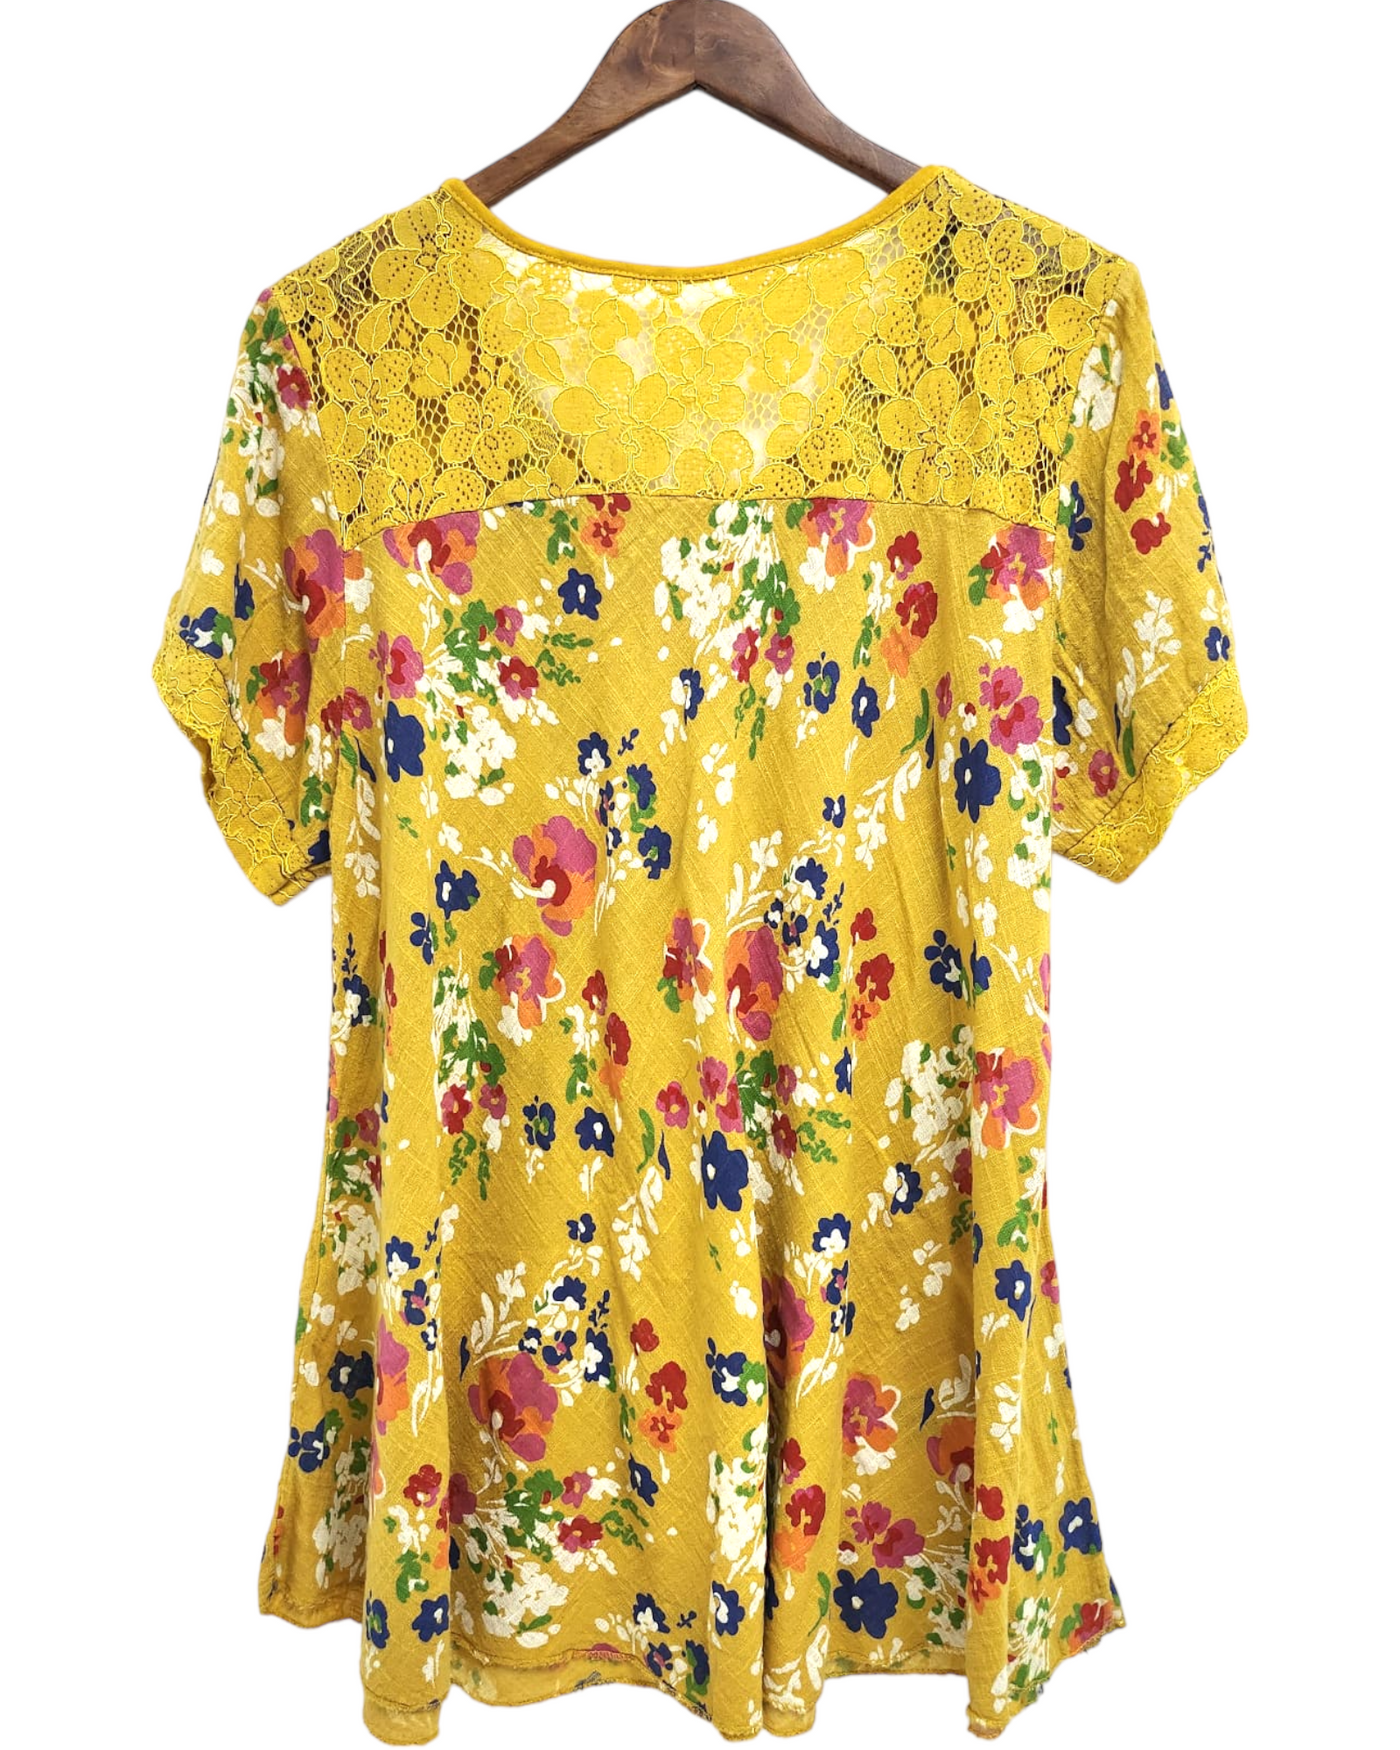 Italian Ditsy Floral Print Cotton Top